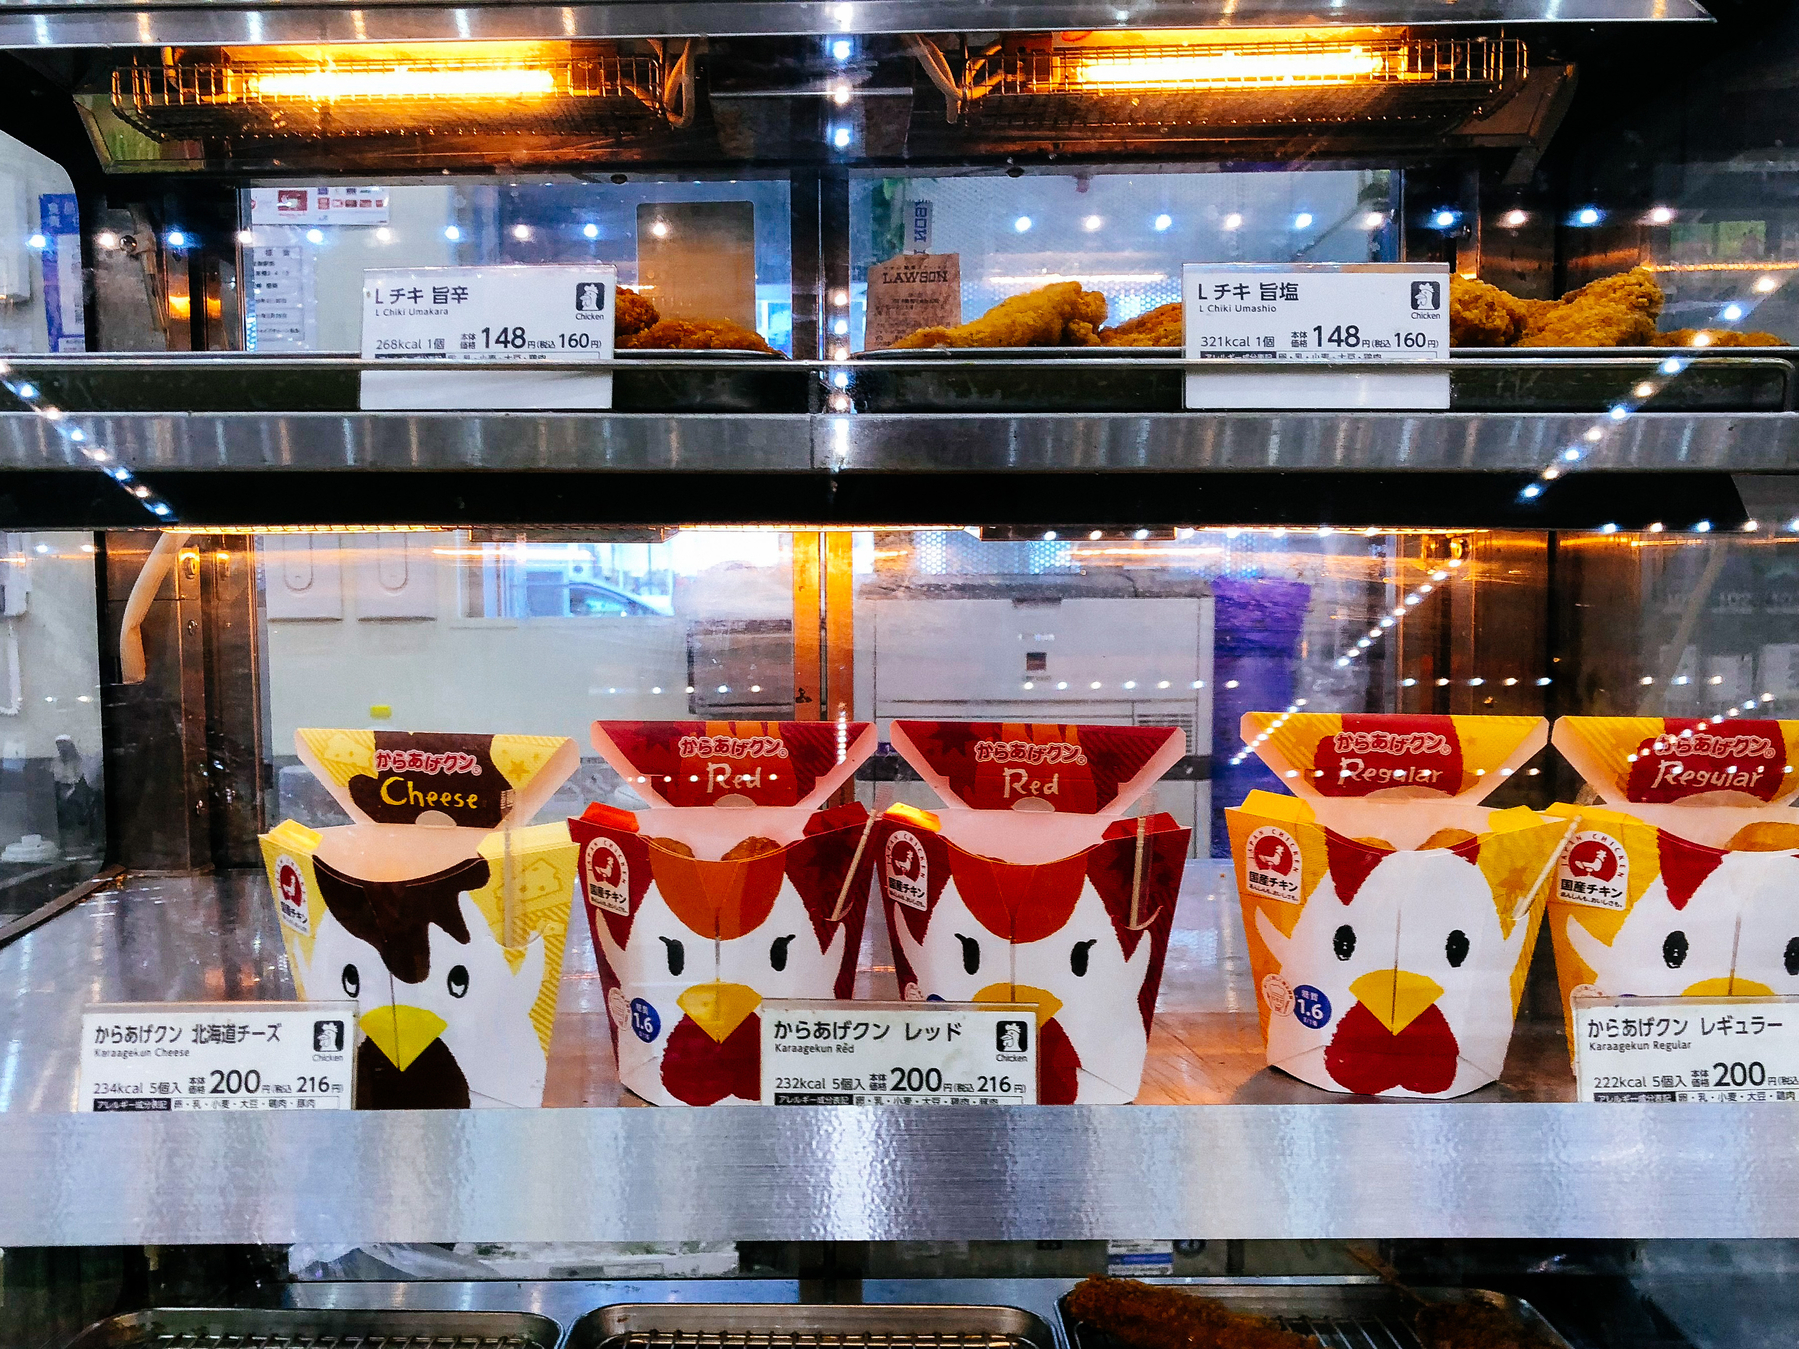 boxes shaped like chickens in a convenience store